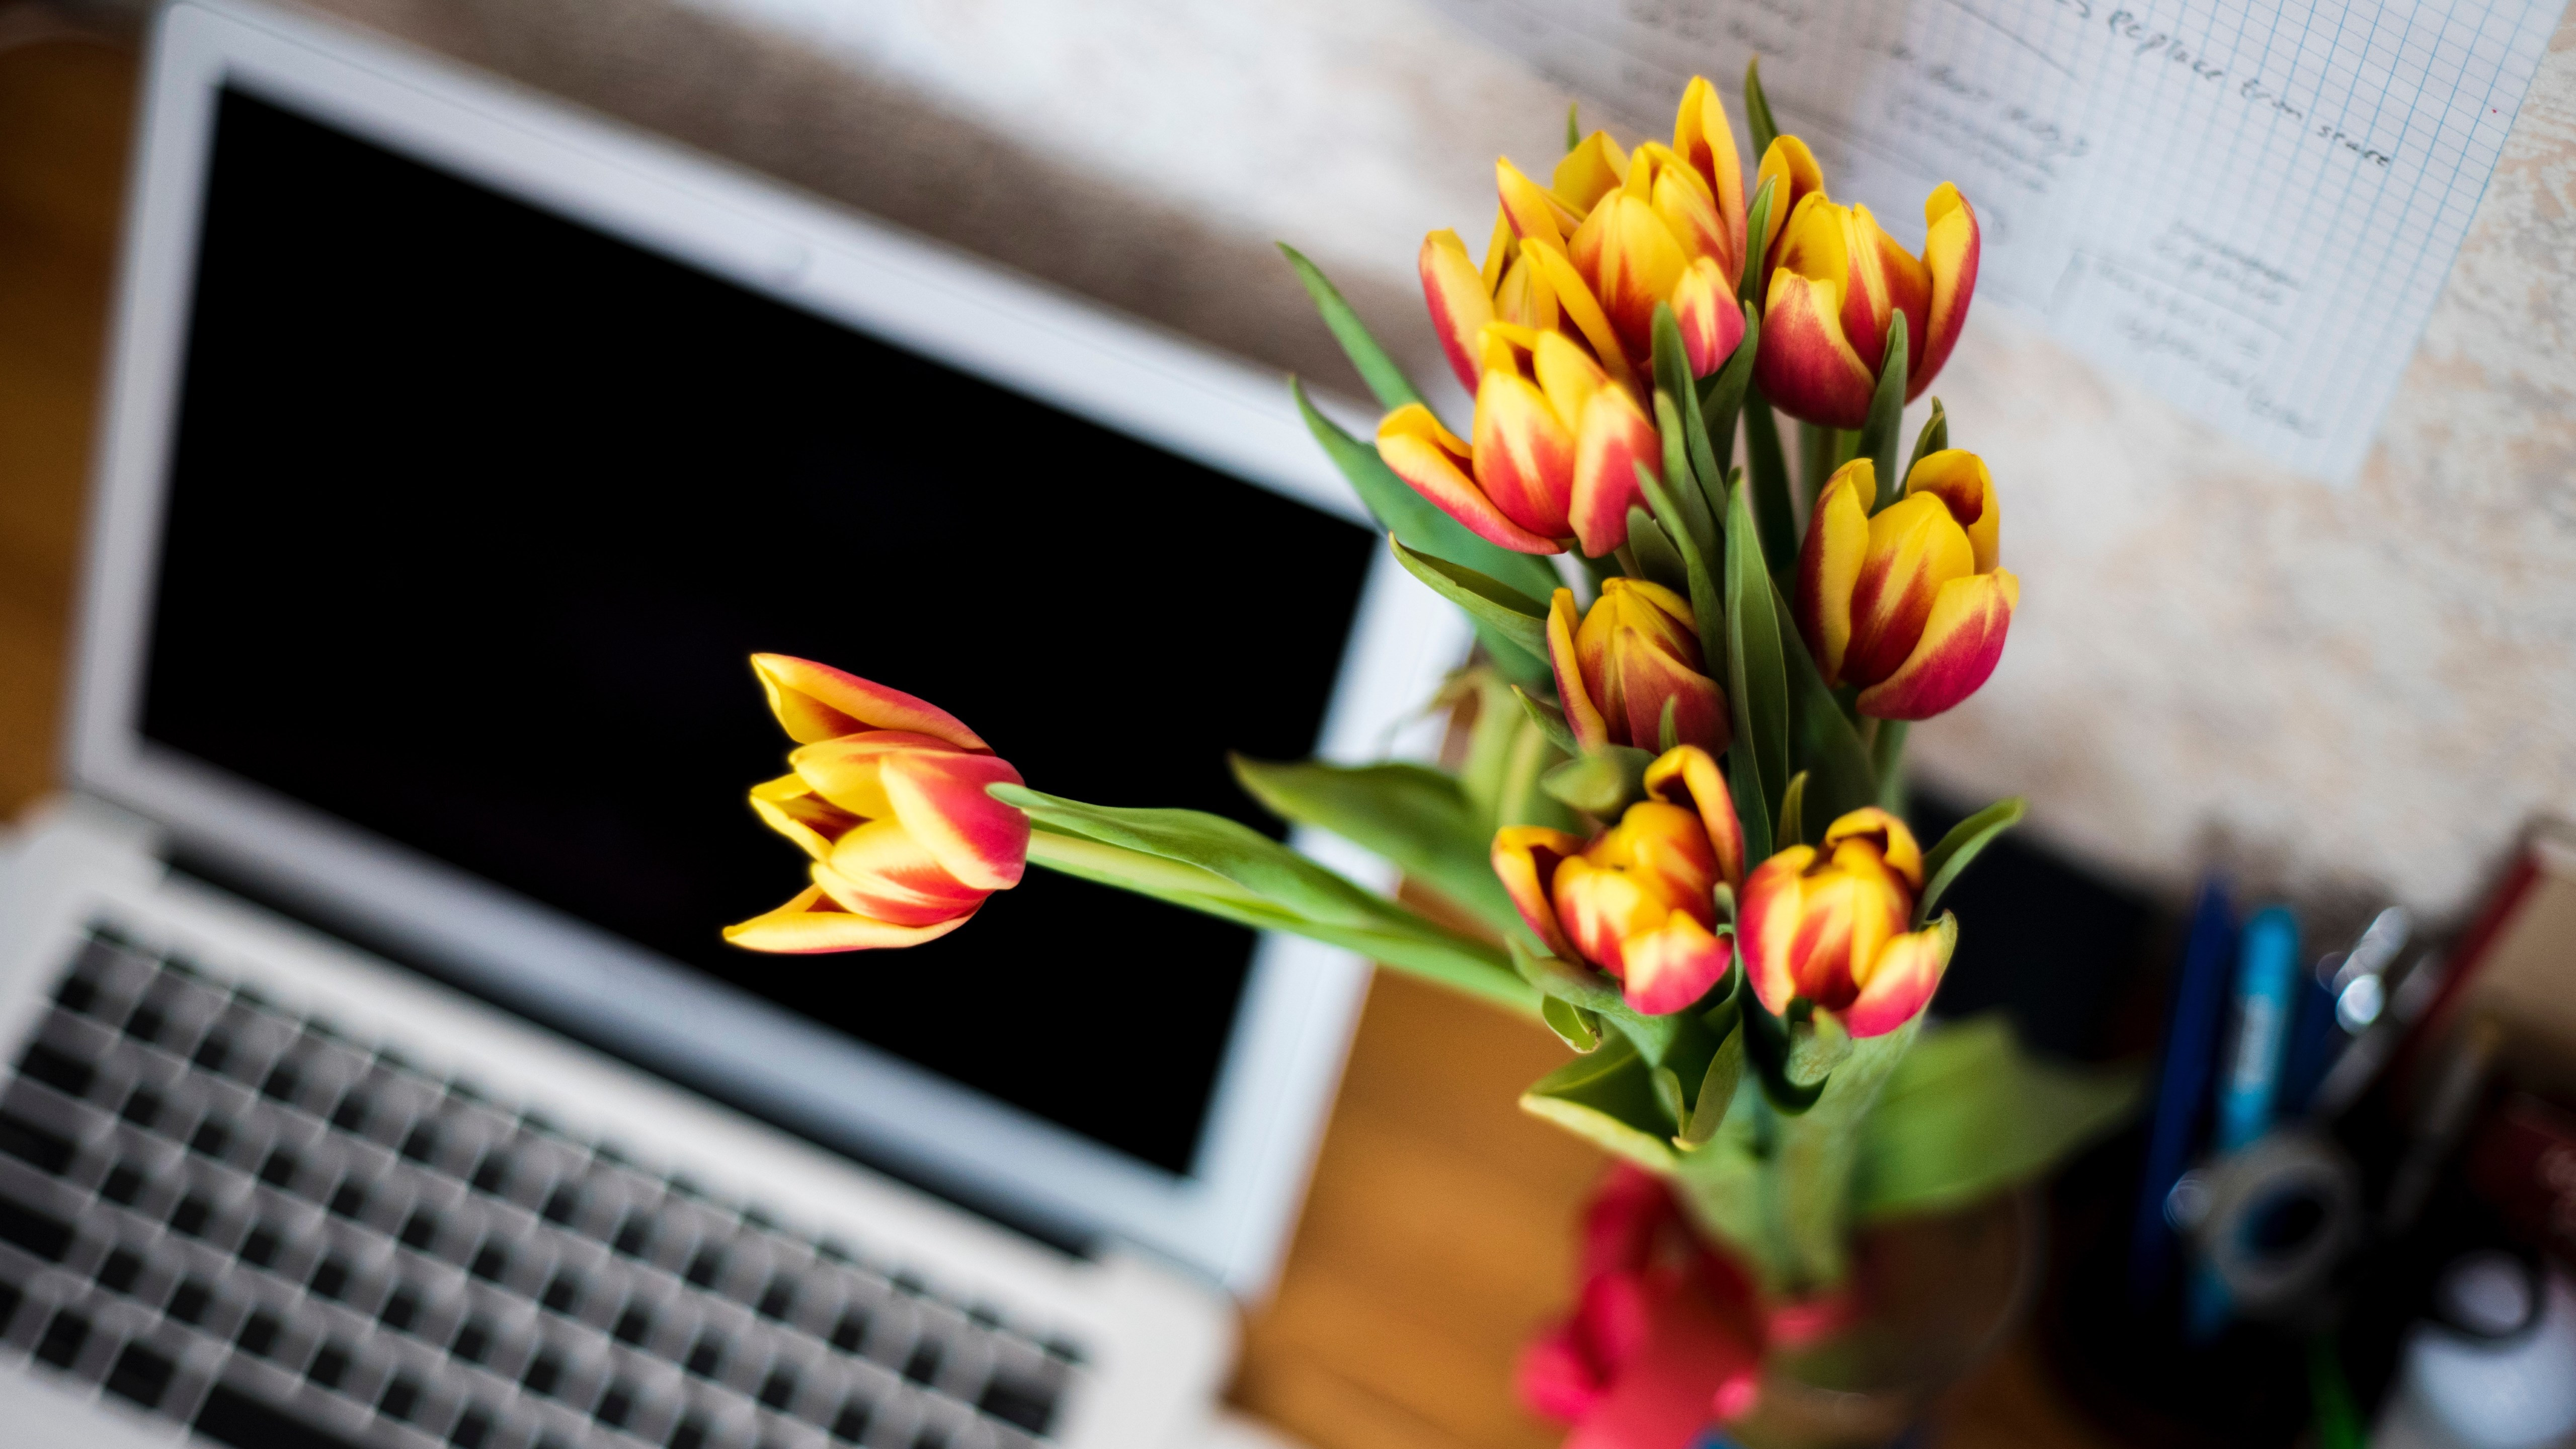 Laptop and tulips bouquet wallpaper 5120x2880